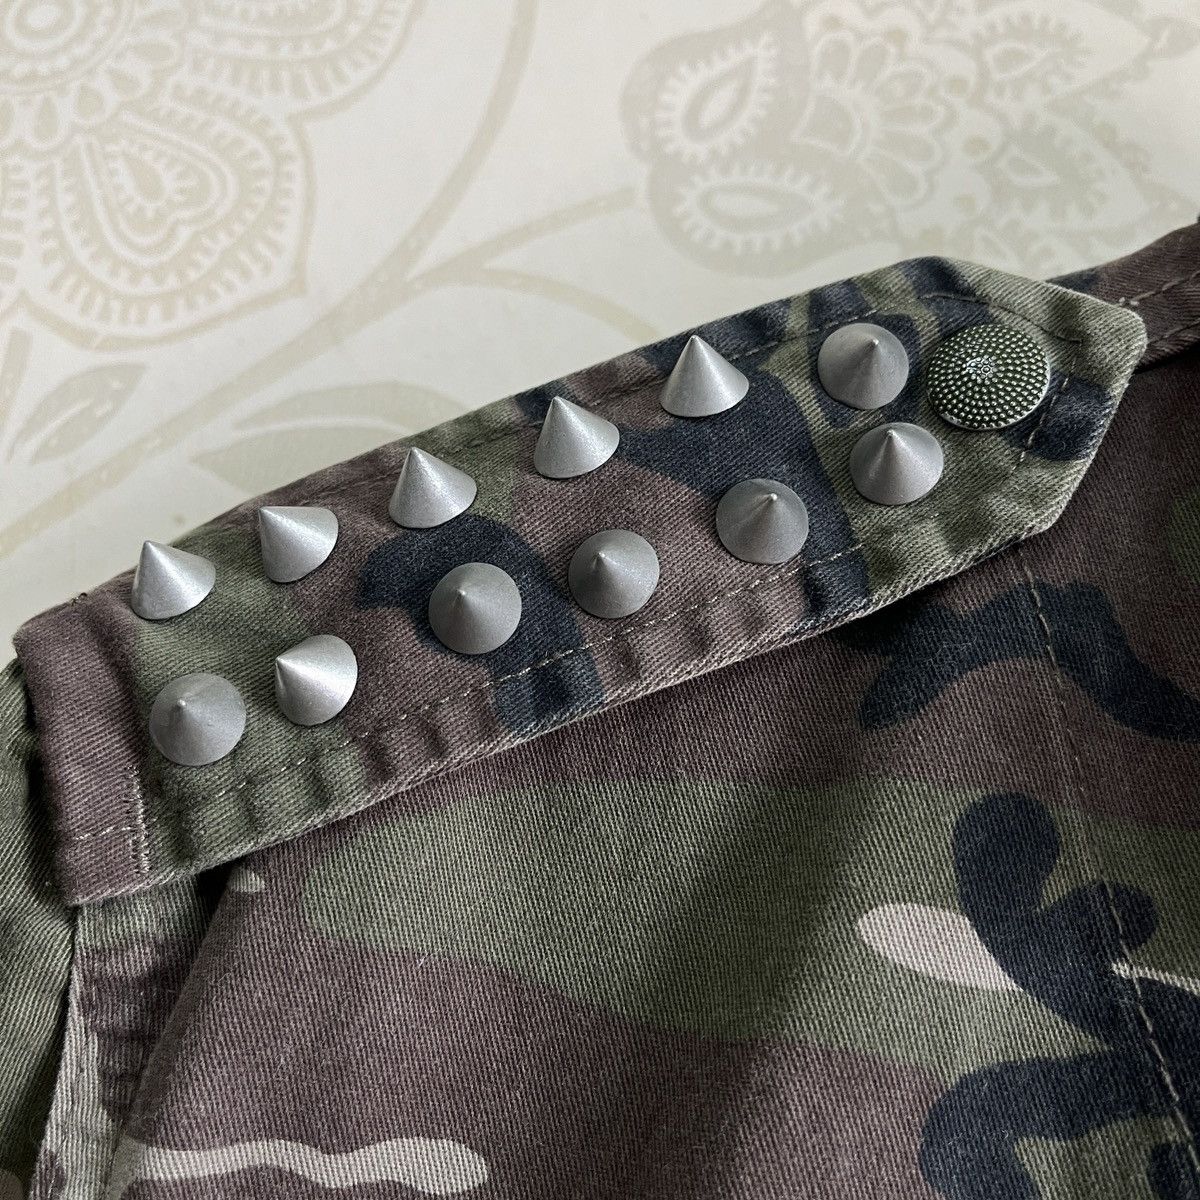 Military - Punk Army Seditionaries Jackets With Studs - 13